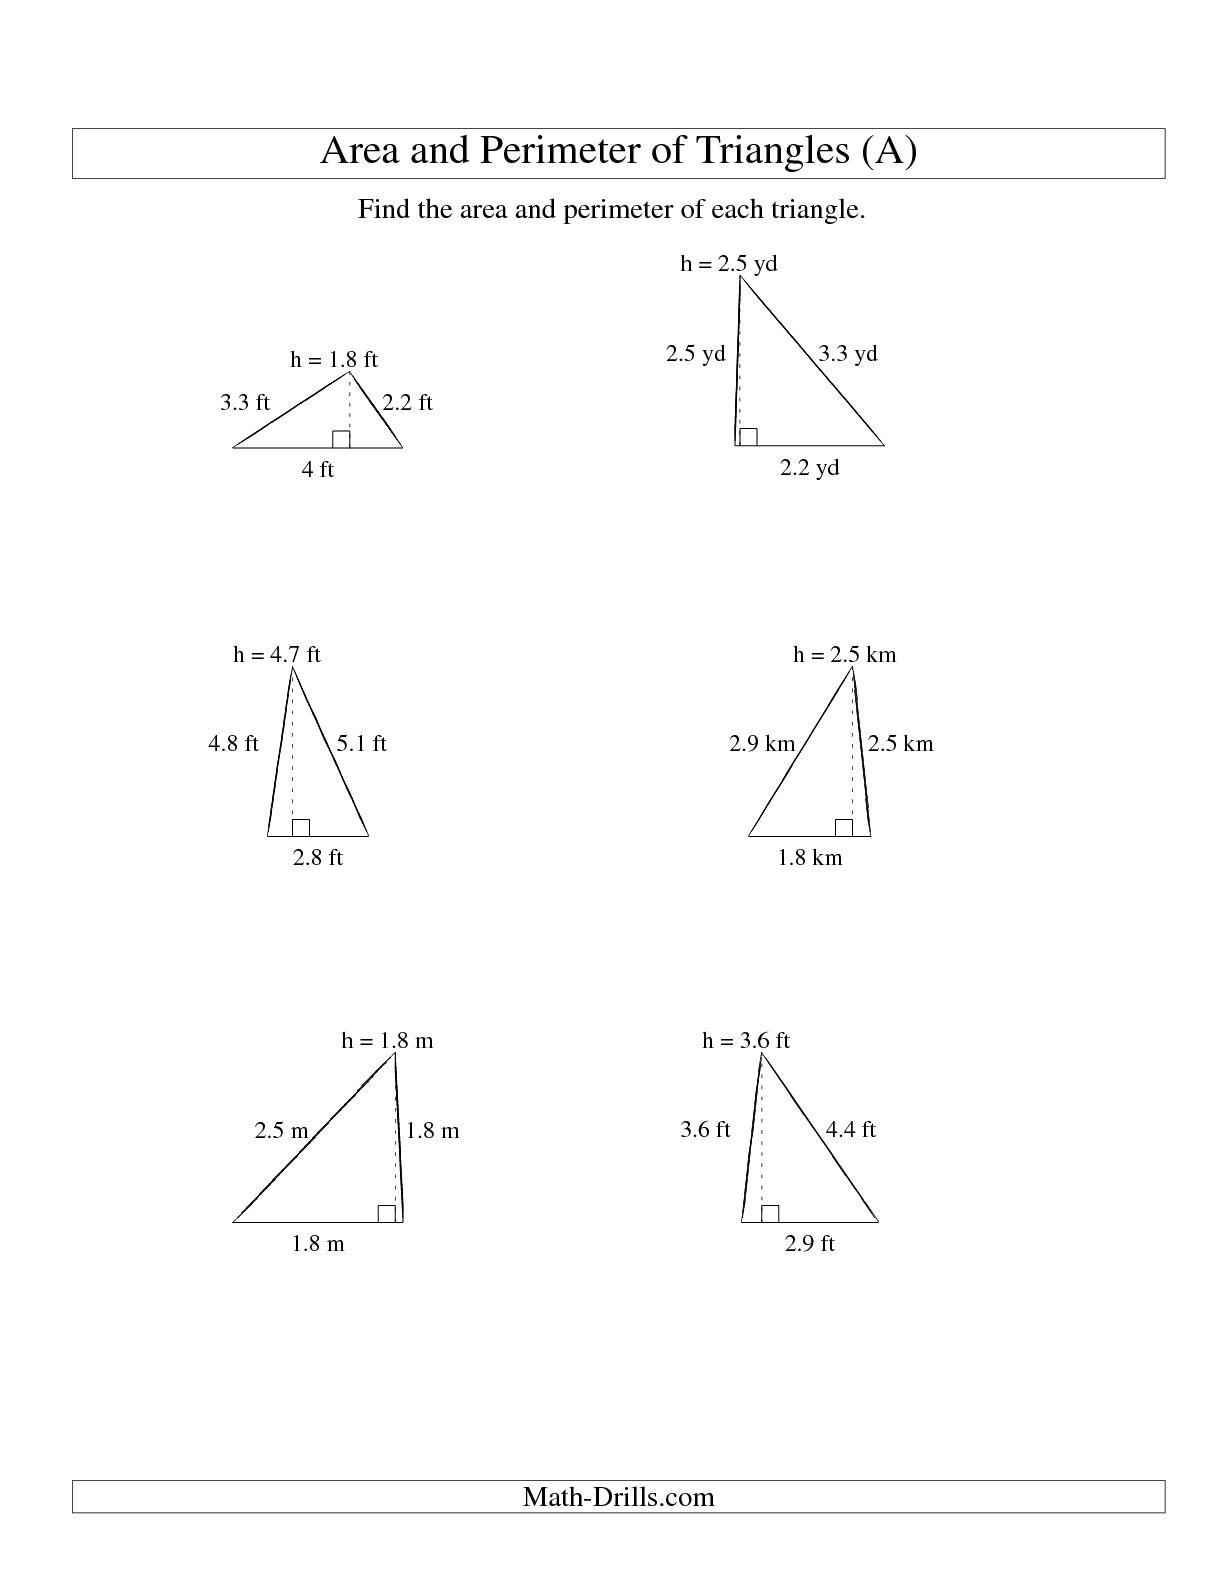 Area and Perimeter Triangles Worksheet